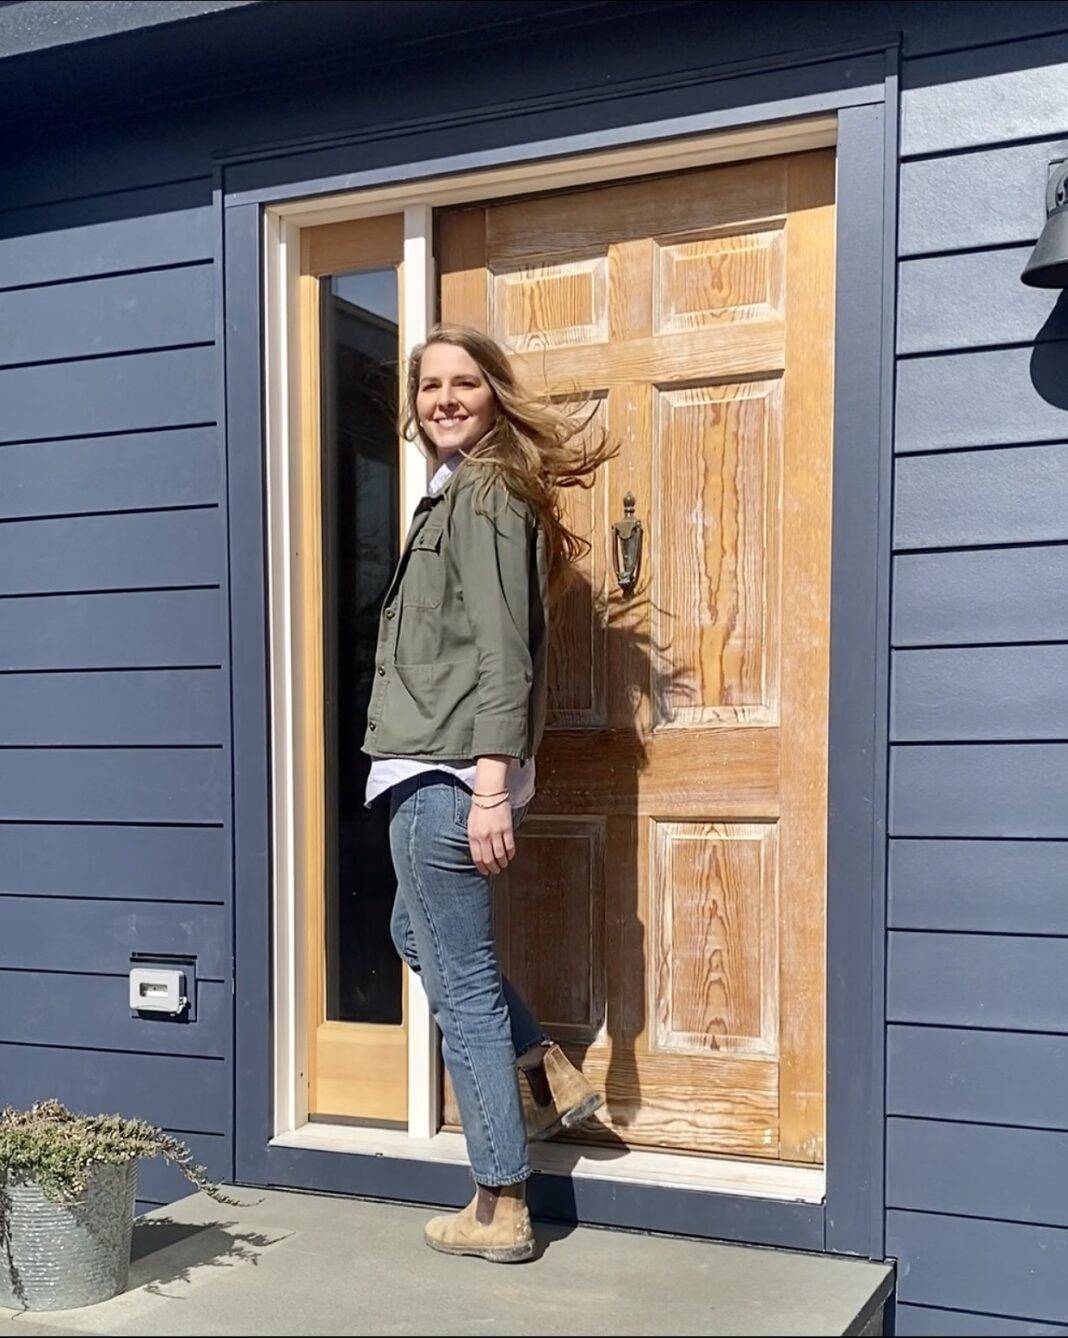 Bea stands at the front door of her newly renovated home.